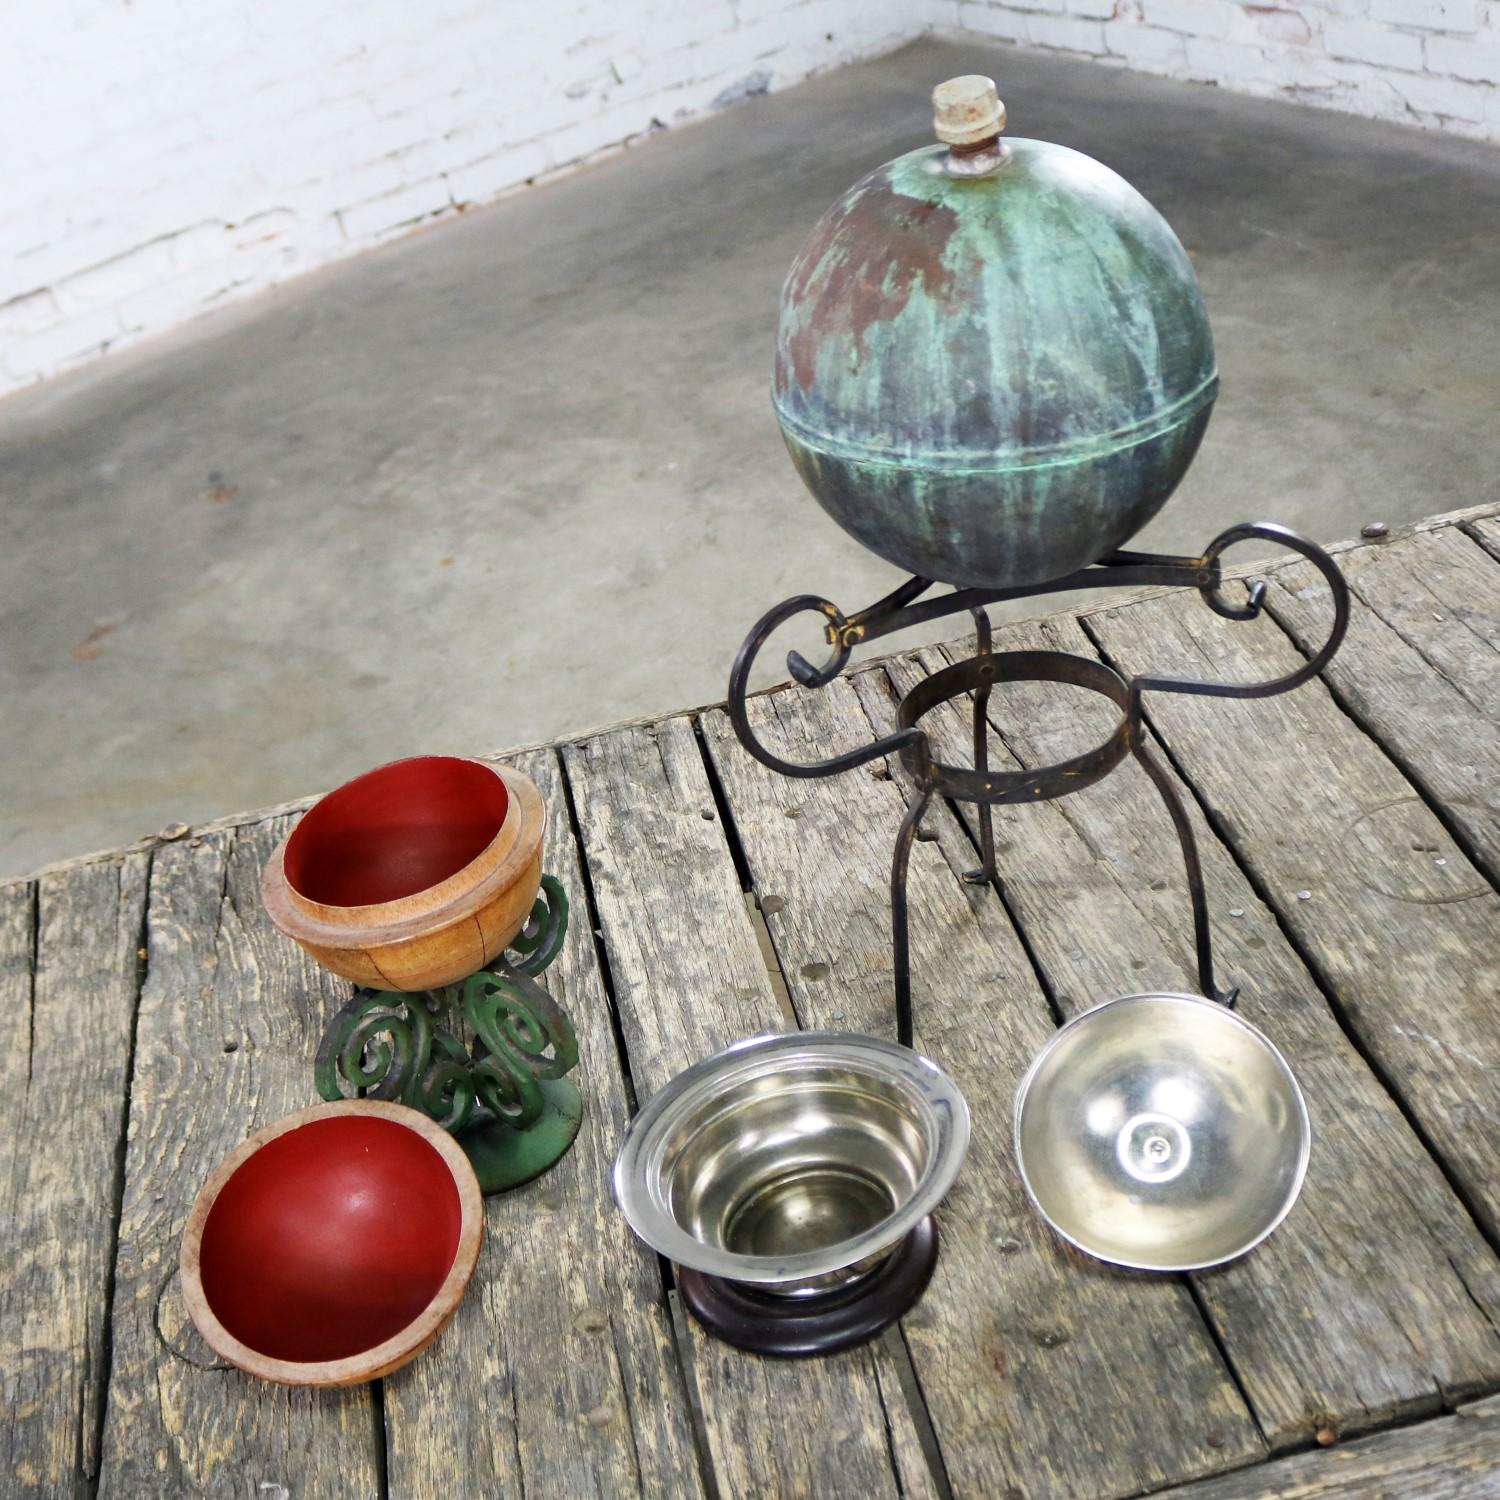 Collection of Orb Objects on Stands als Centerpiece oder Object d'Art im Angebot 1